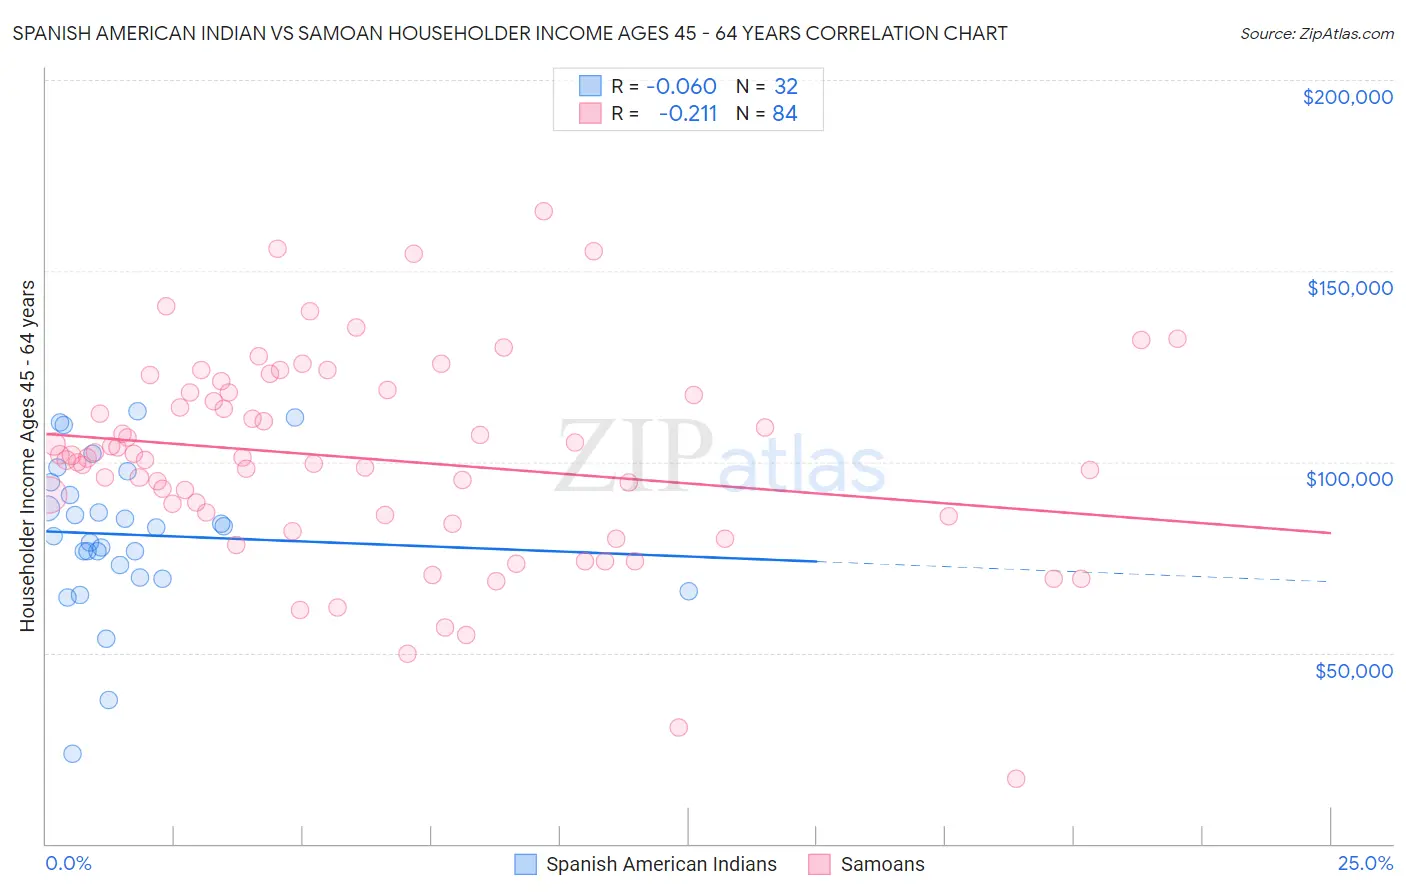 Spanish American Indian vs Samoan Householder Income Ages 45 - 64 years